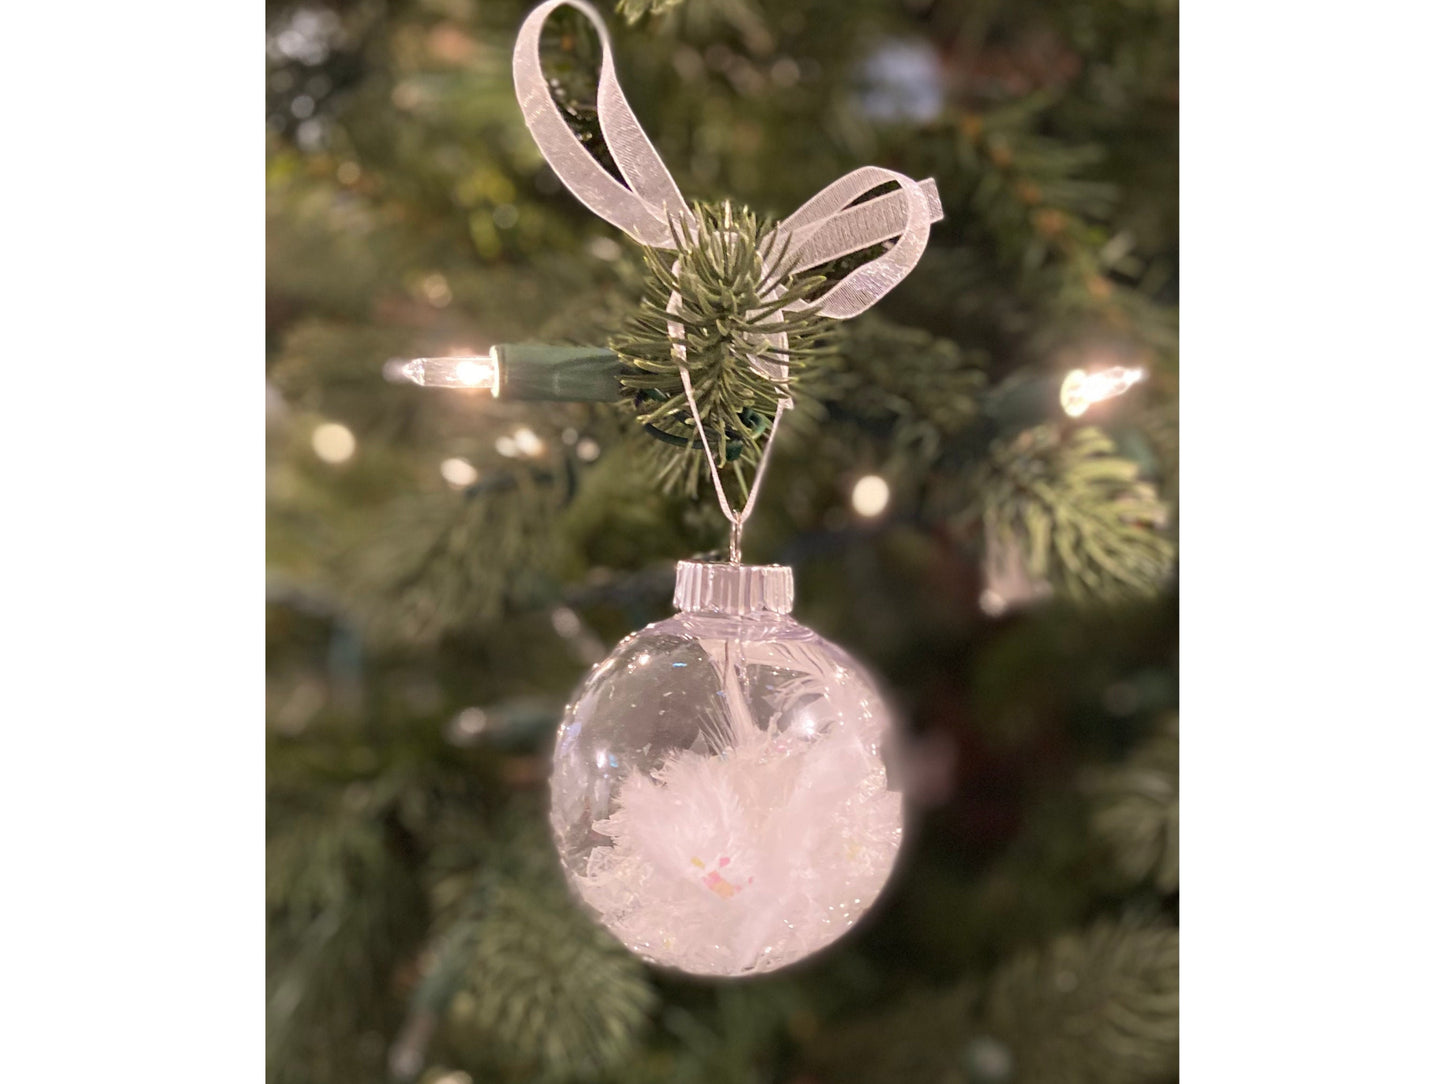 Angel Feather Memorial Ornament